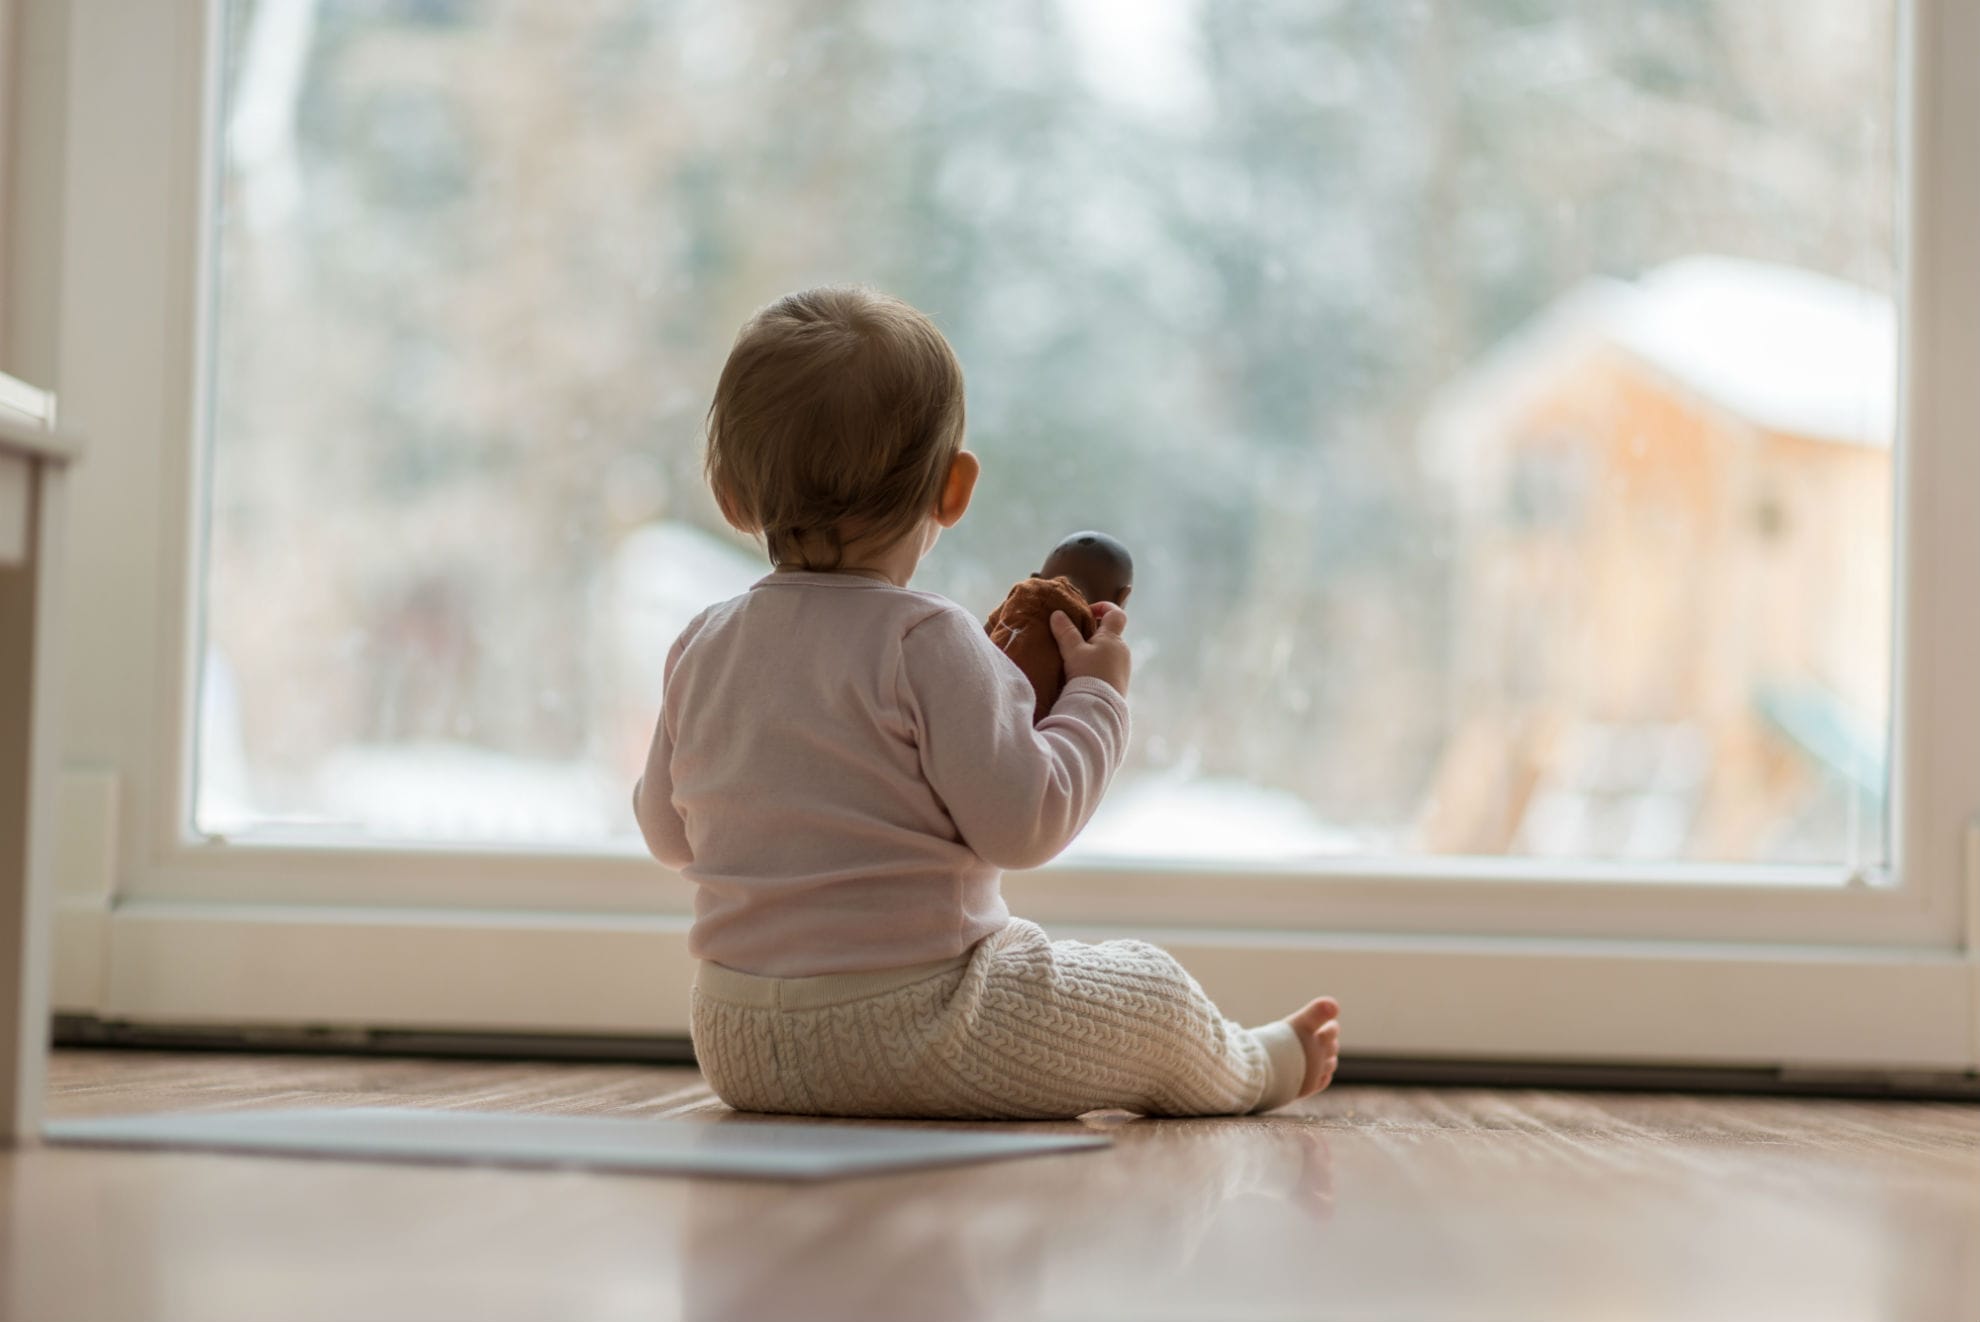 little-baby-girl-watching-the-snow-outdoors-SKCEN47-min